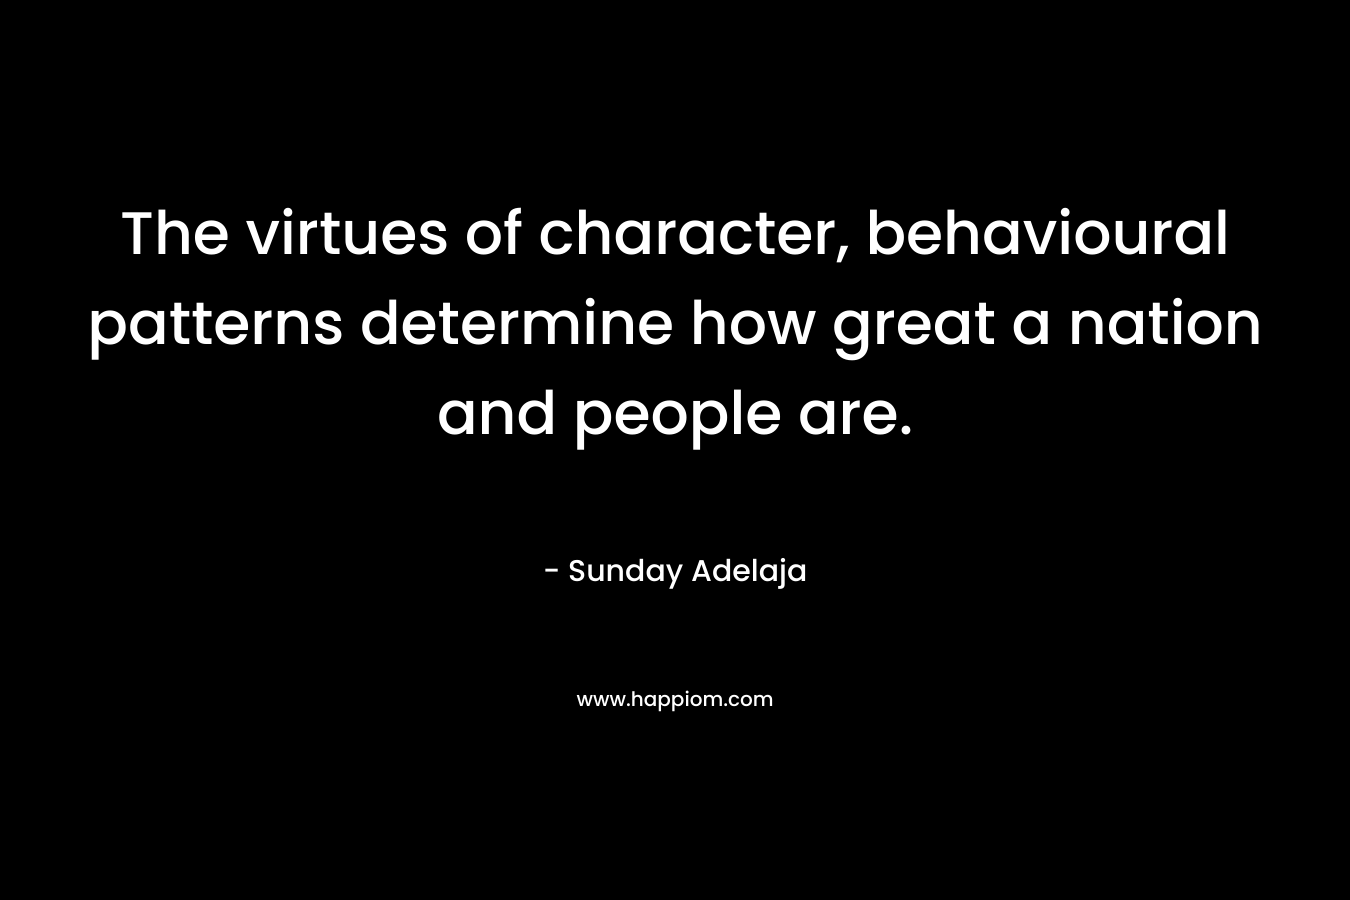 The virtues of character, behavioural patterns determine how great a nation and people are.